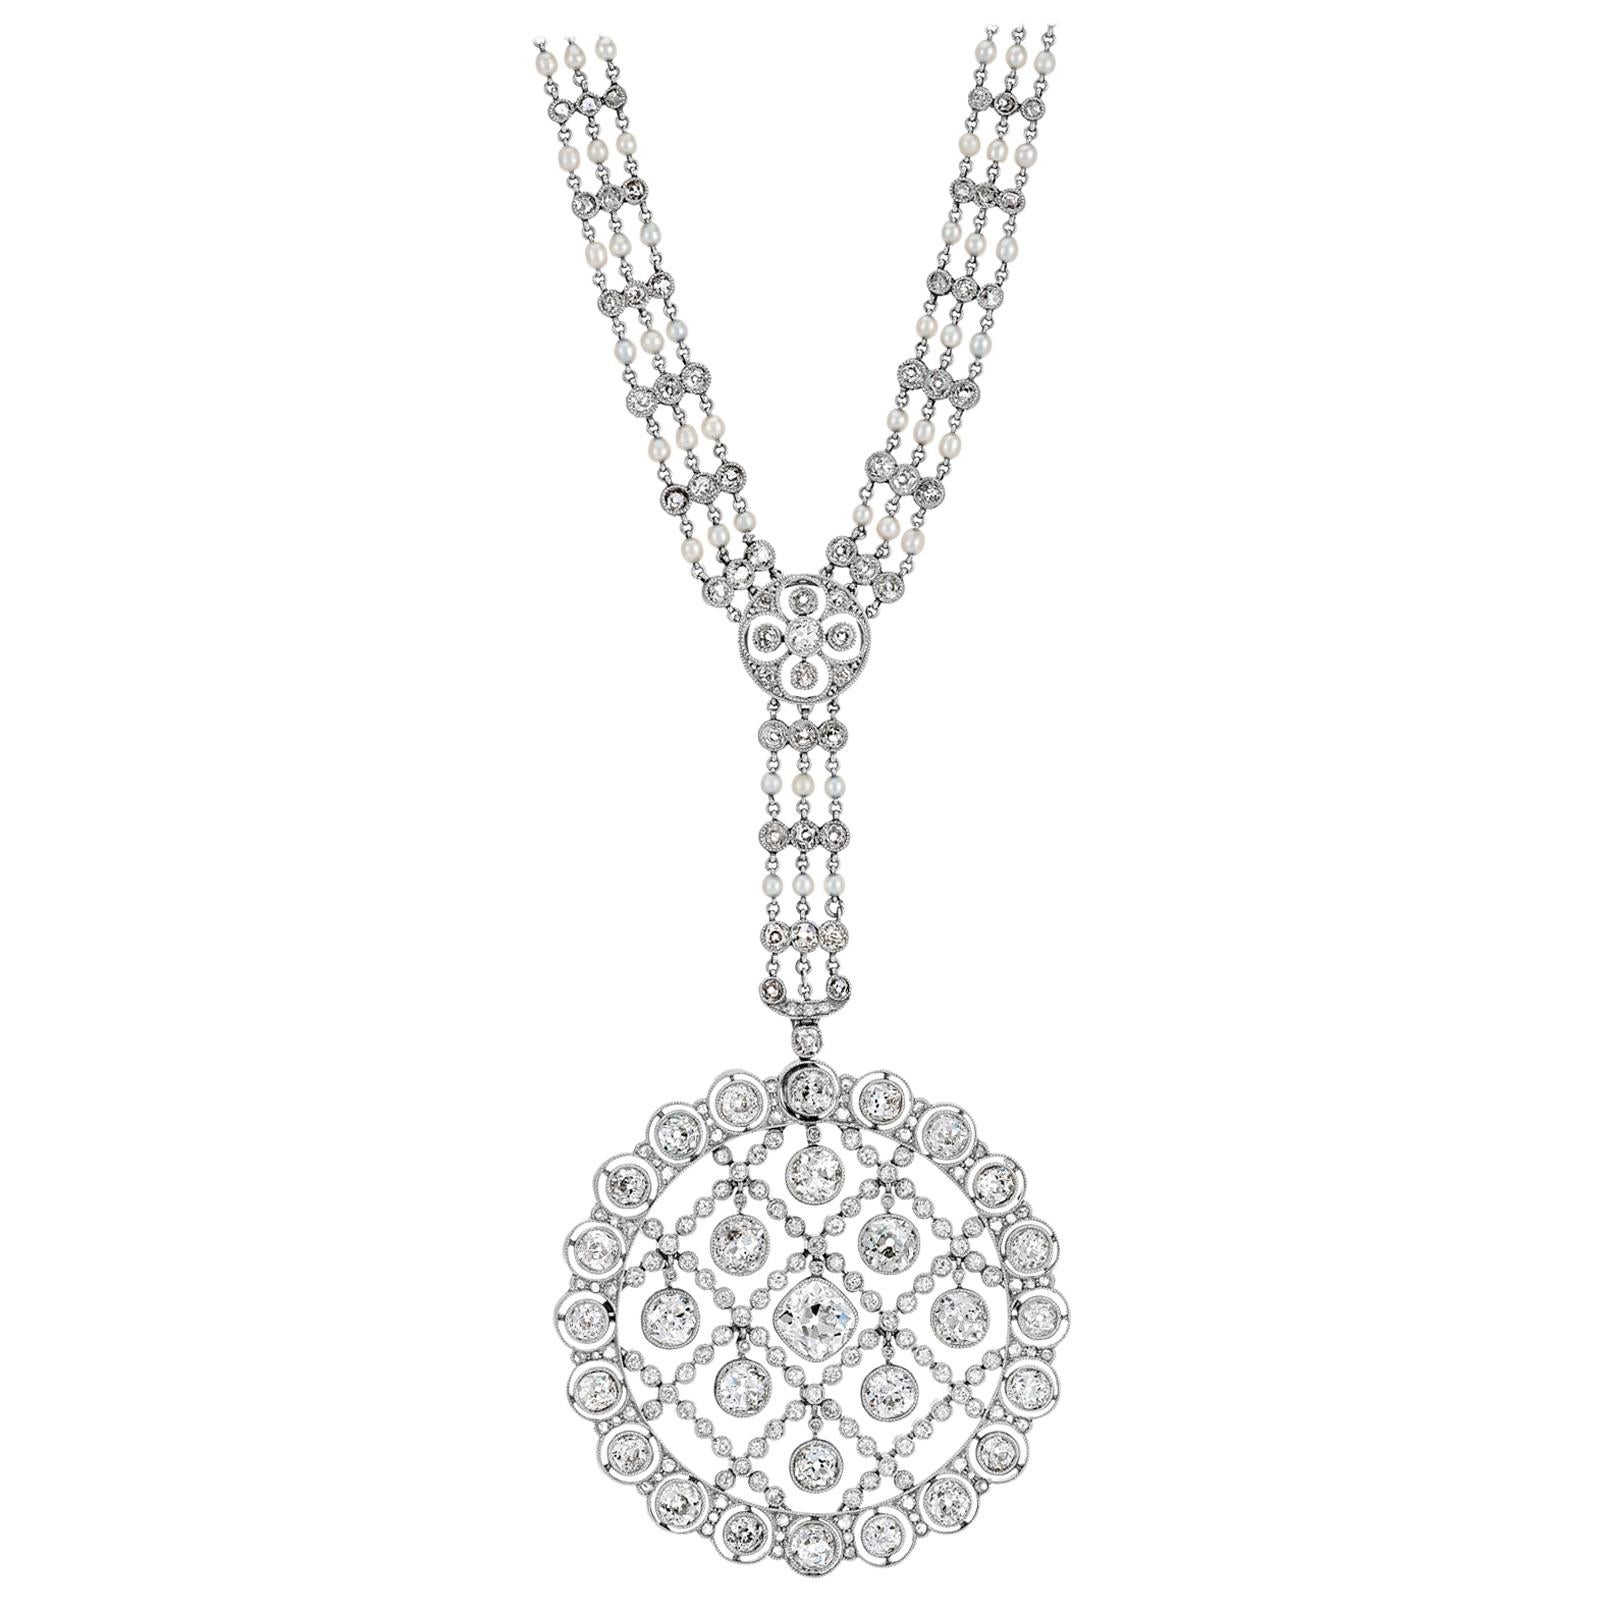 Rare Edwardian Platinum Diamond and Seed Pearl Pendant Necklace, circa 1910 For Sale